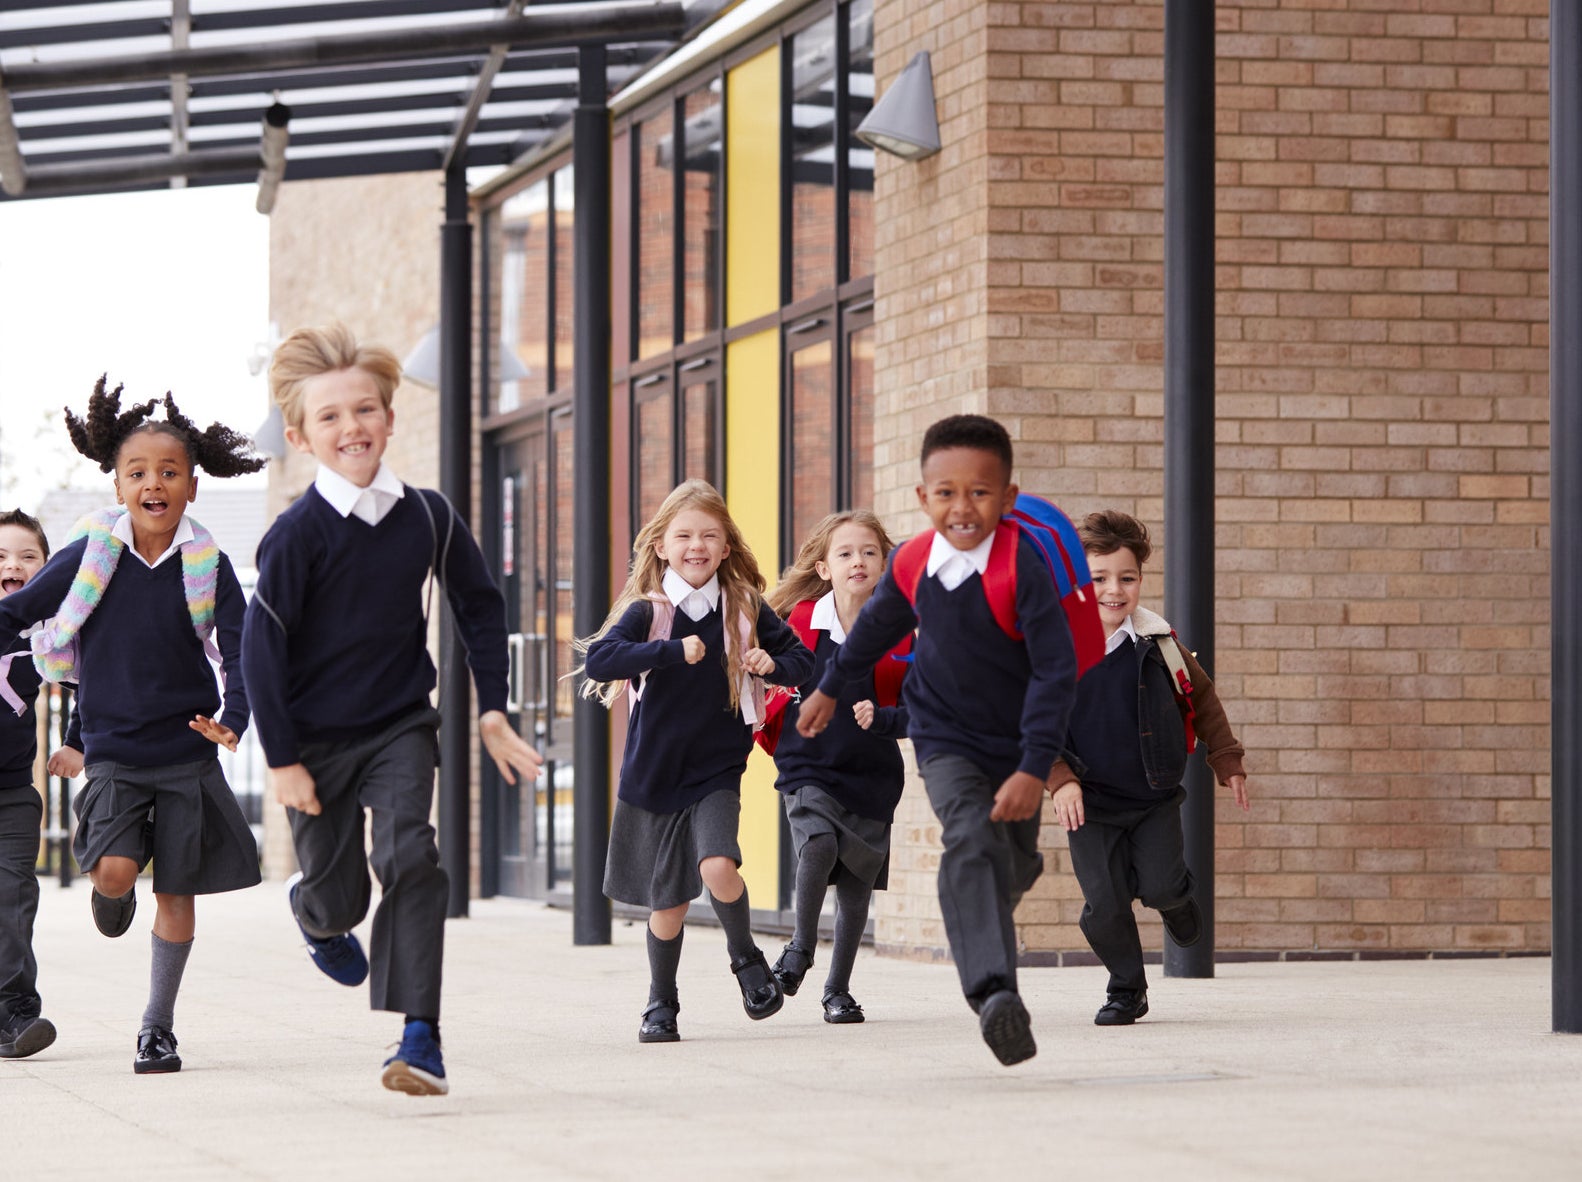 Schoolkids run out of the school after the final bell rang